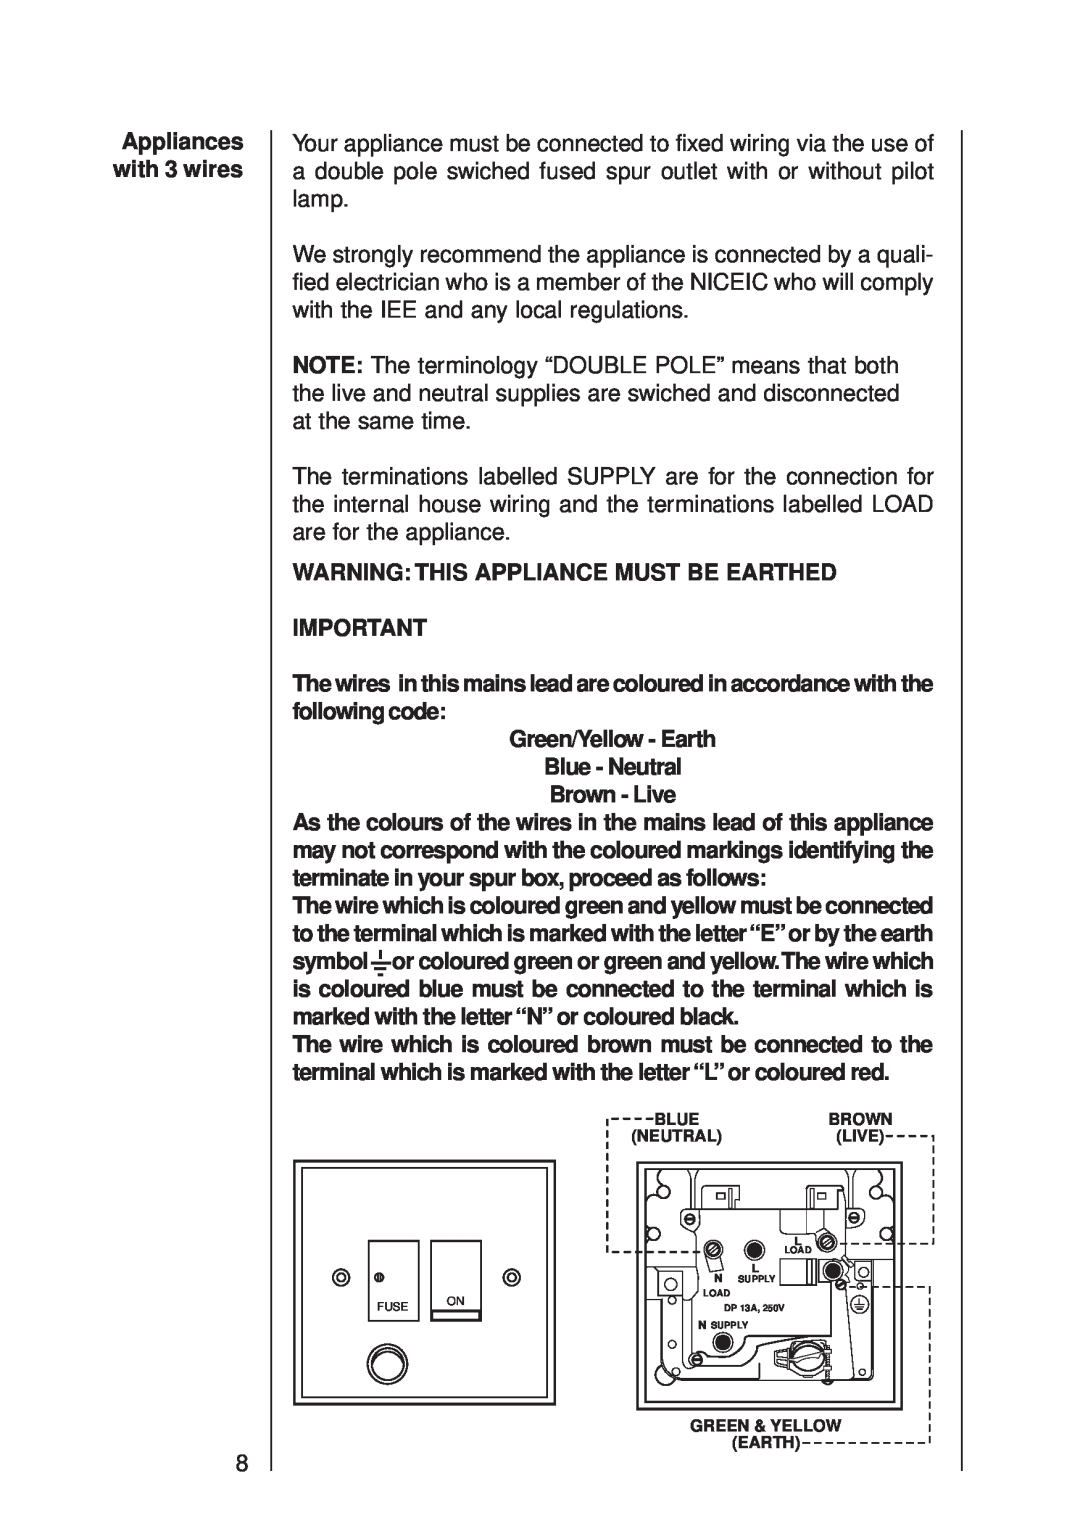 Electrolux 335 D operating instructions Appliances with 3 wires, Warning This Appliance Must Be Earthed 